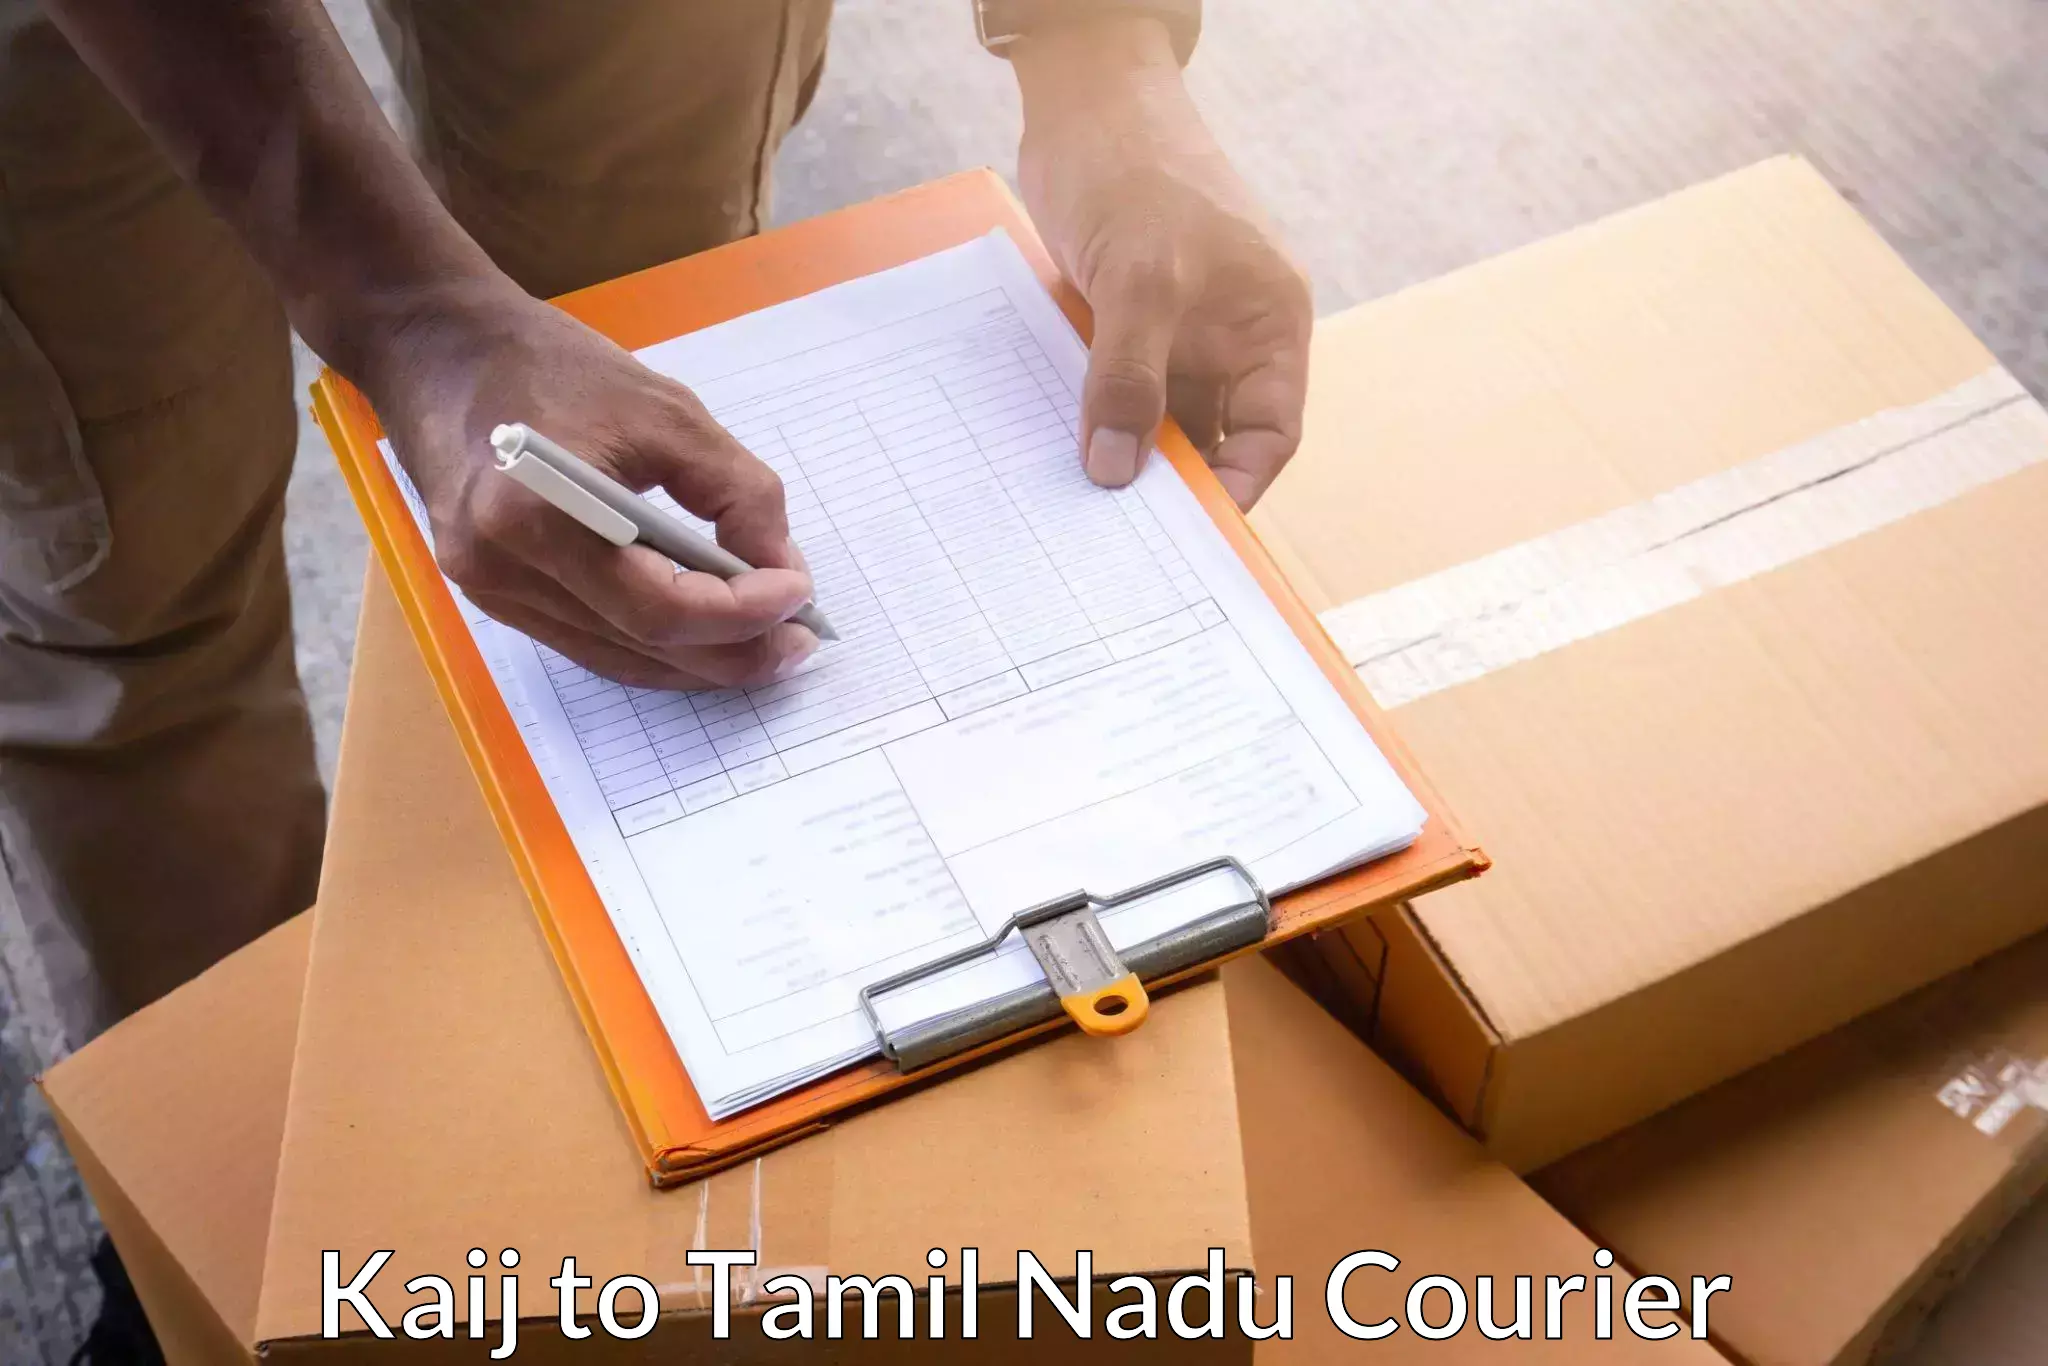 Business delivery service Kaij to Padi